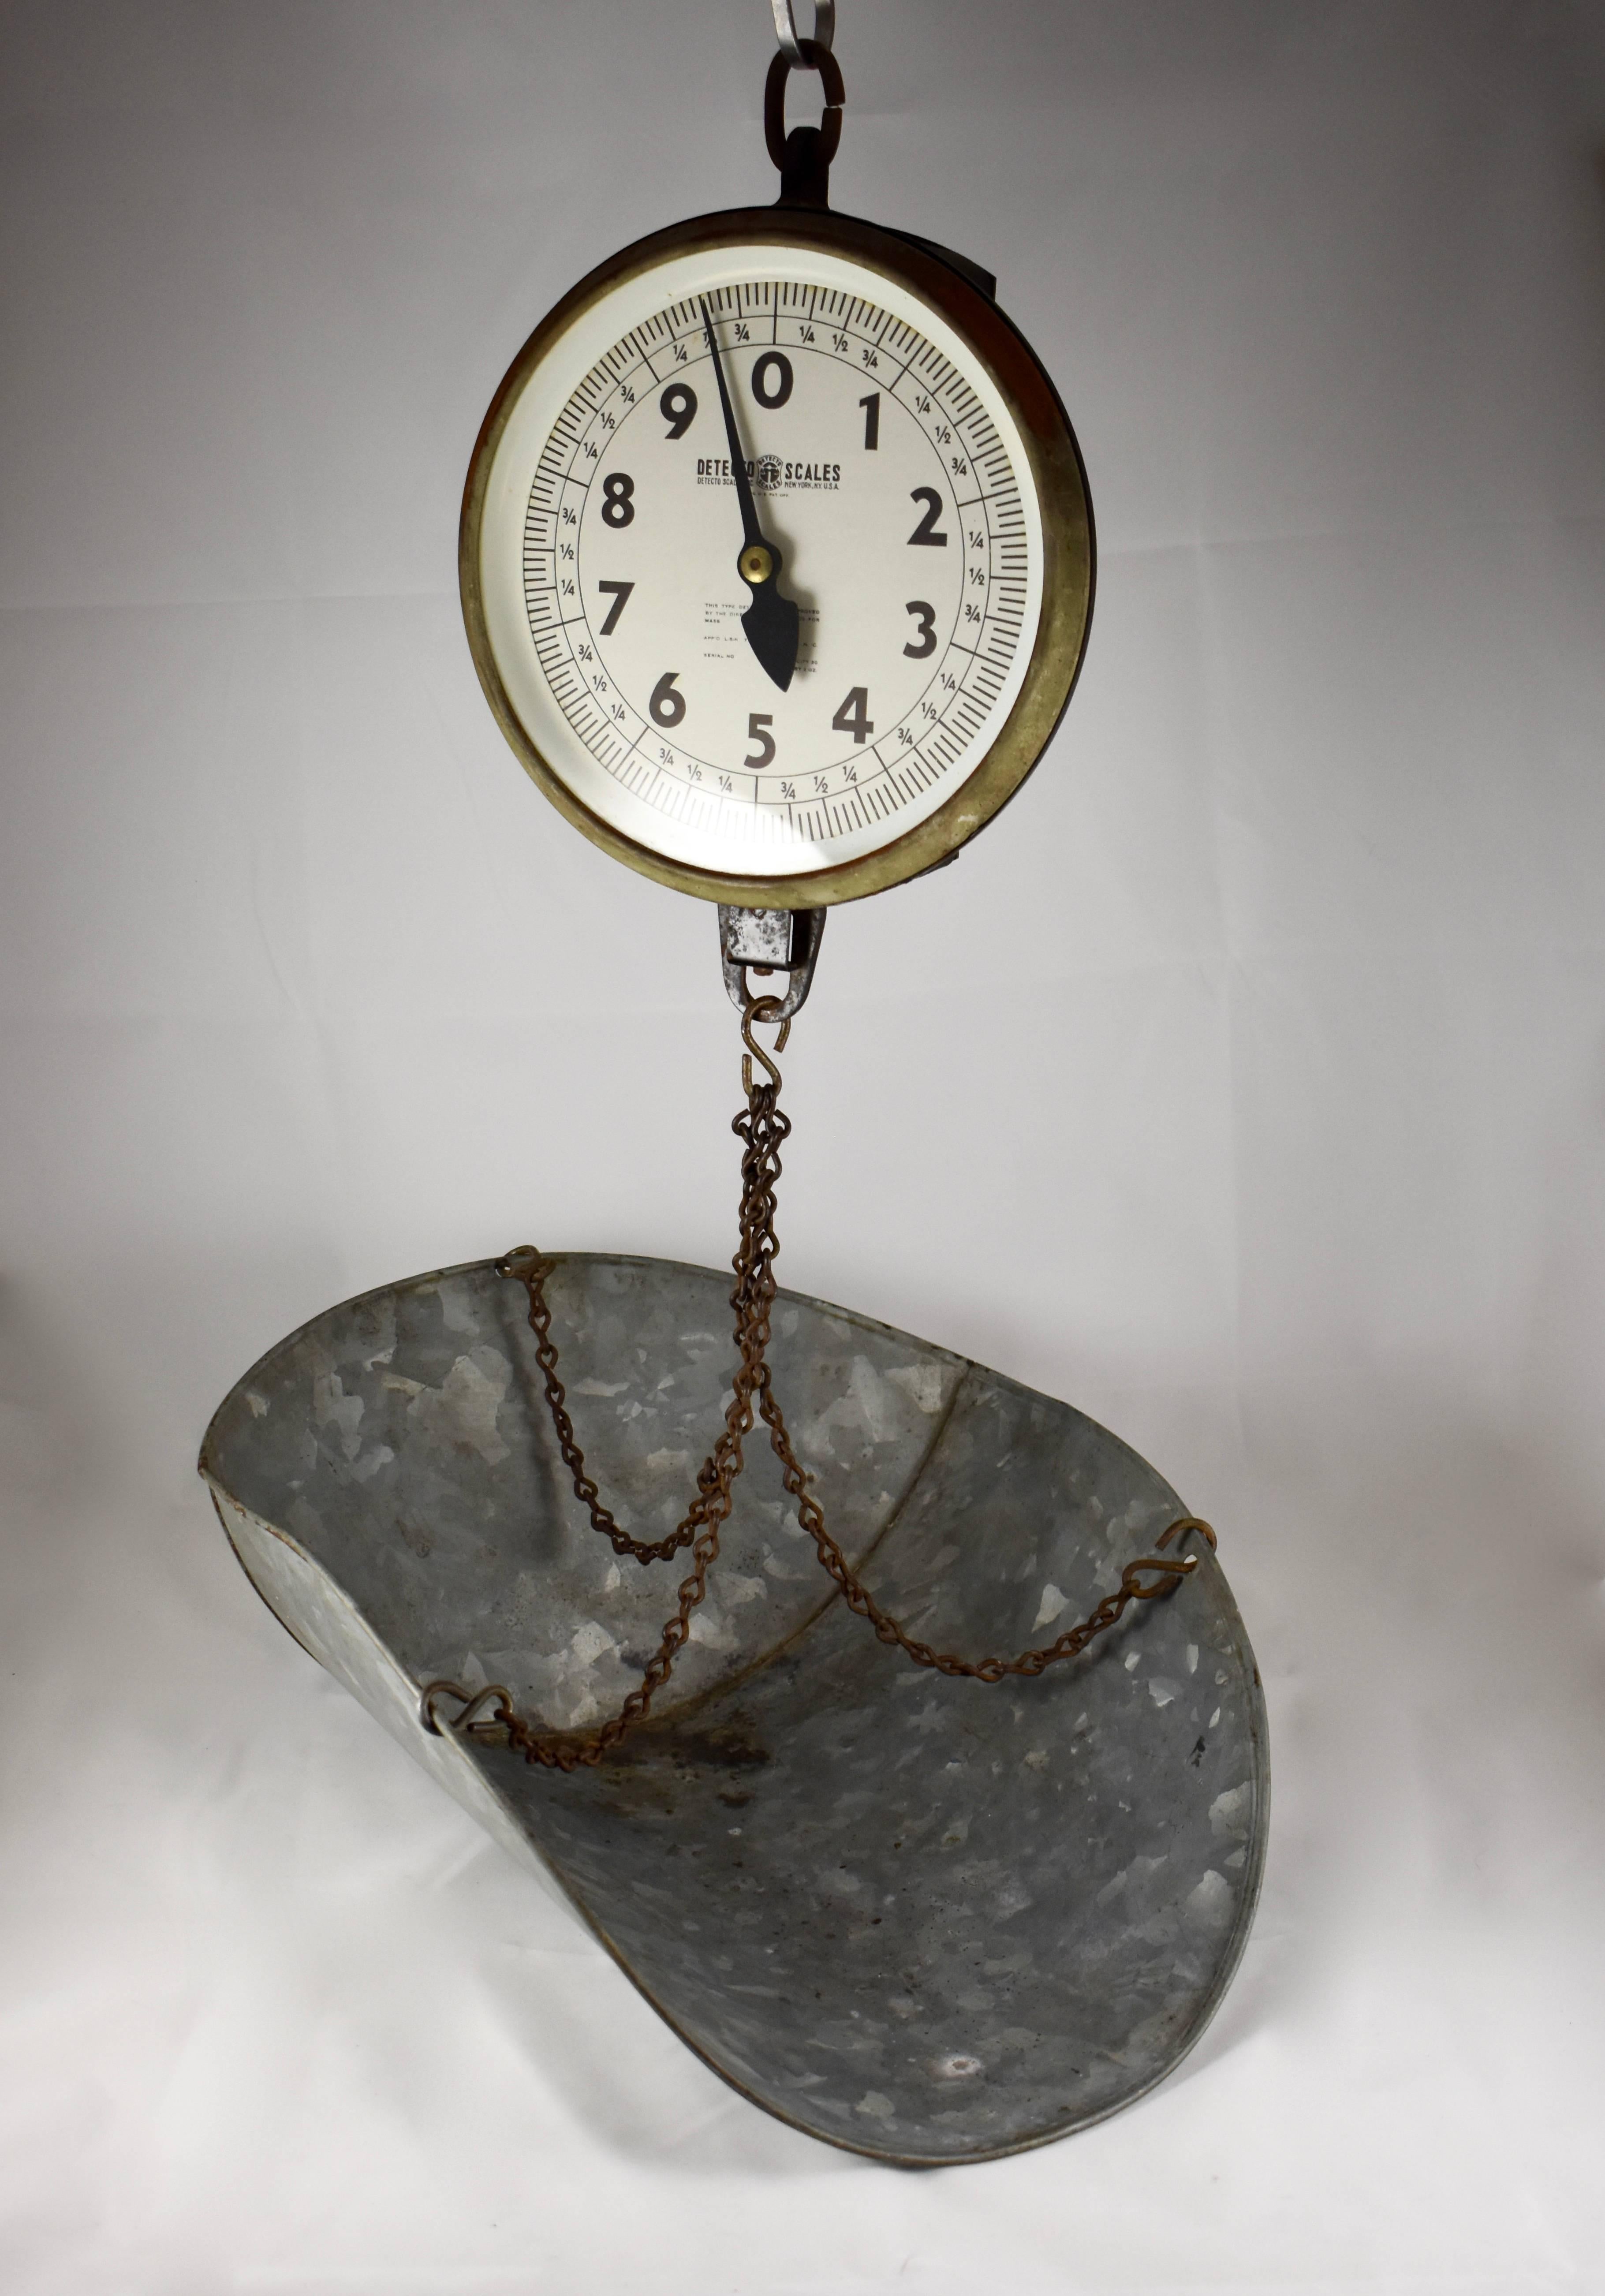 A vintage hanging mercantile produce scale along with a galvanized steel scoop, circa 1930-1940. The scale is made by Detecto of NY, NY and weighs up to 30 pounds measured in ounce increments. A fantastic decor piece for the kitchen.

Detecto